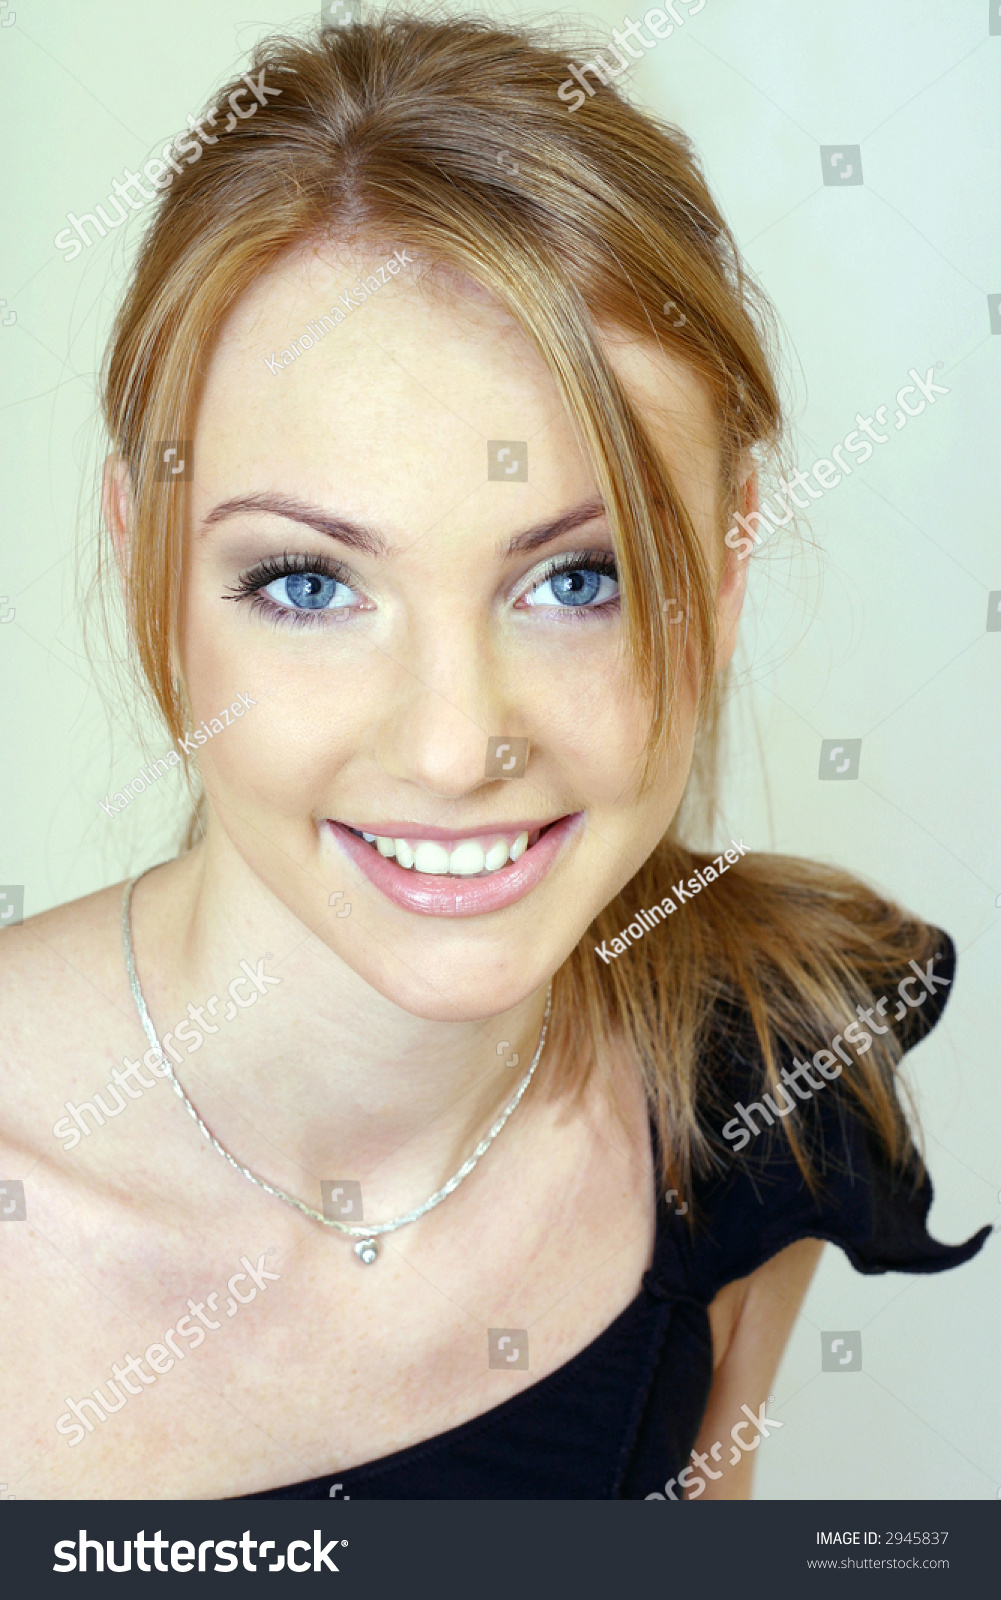 Beautiful Young Ginger Smiling Girl With Big Blue E